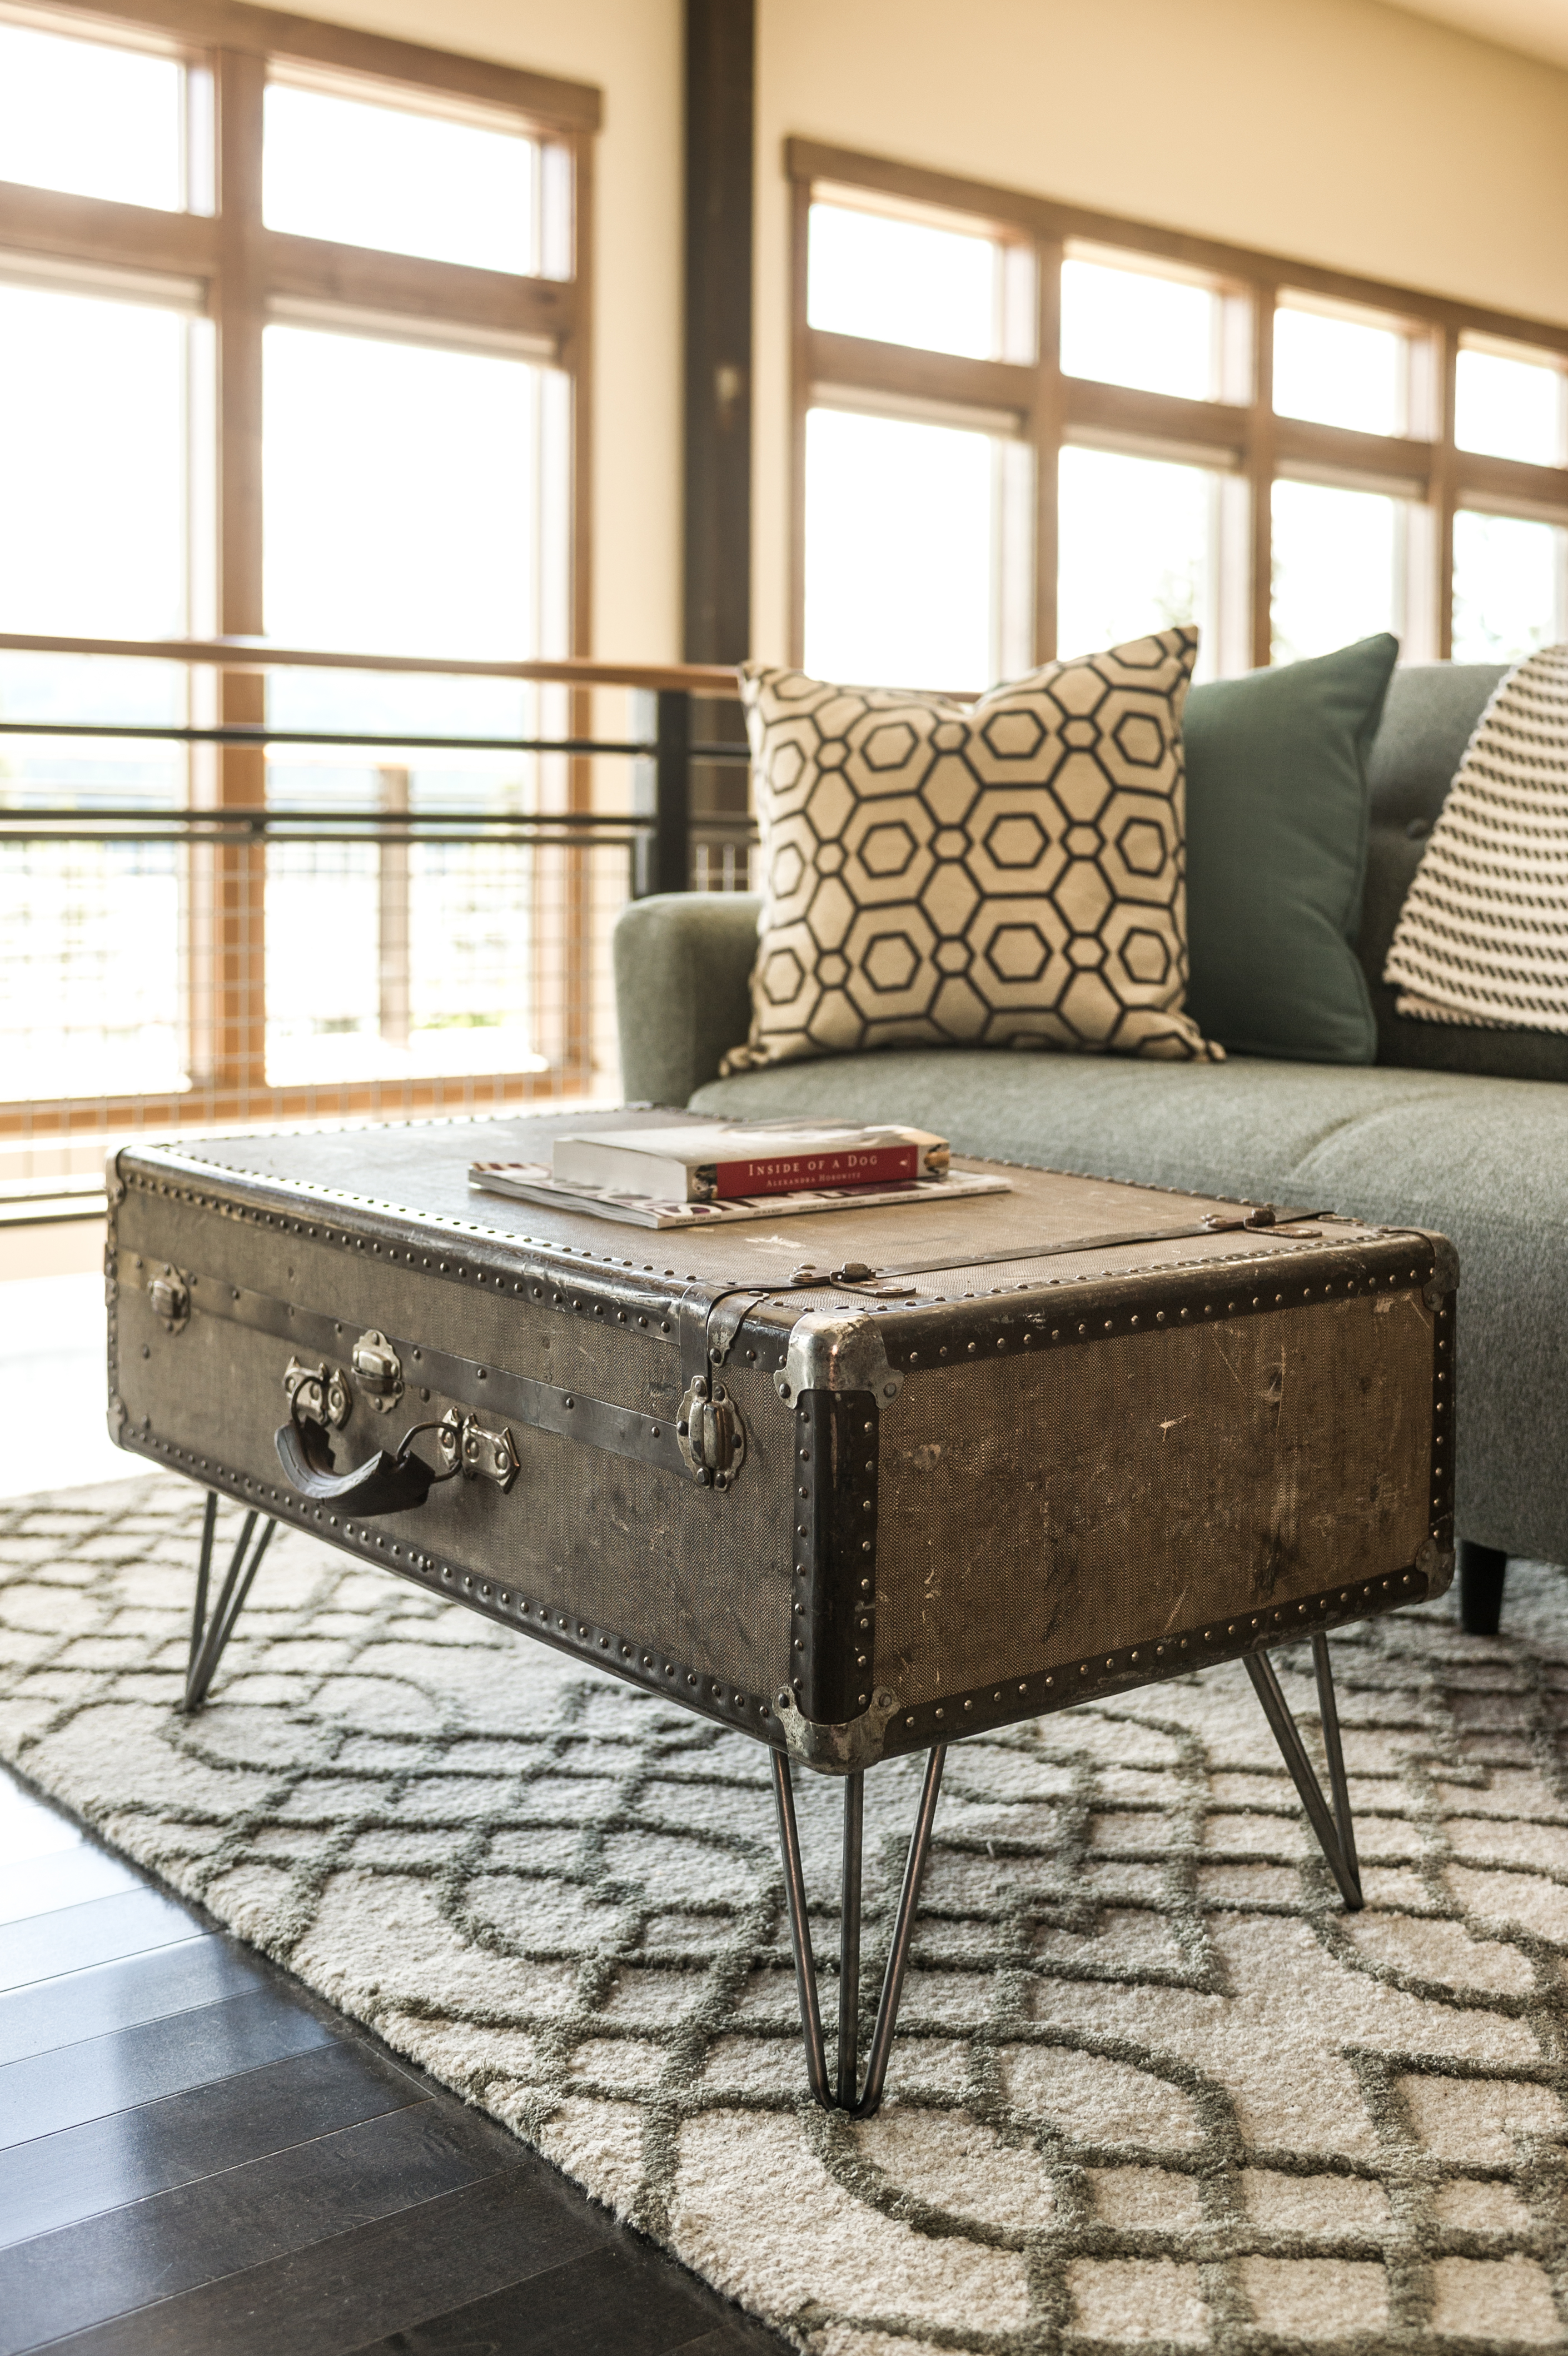 Suitcase Coffee Table | DIY Ways To Upcycle Vintage Suitcases | vingate suitcase 